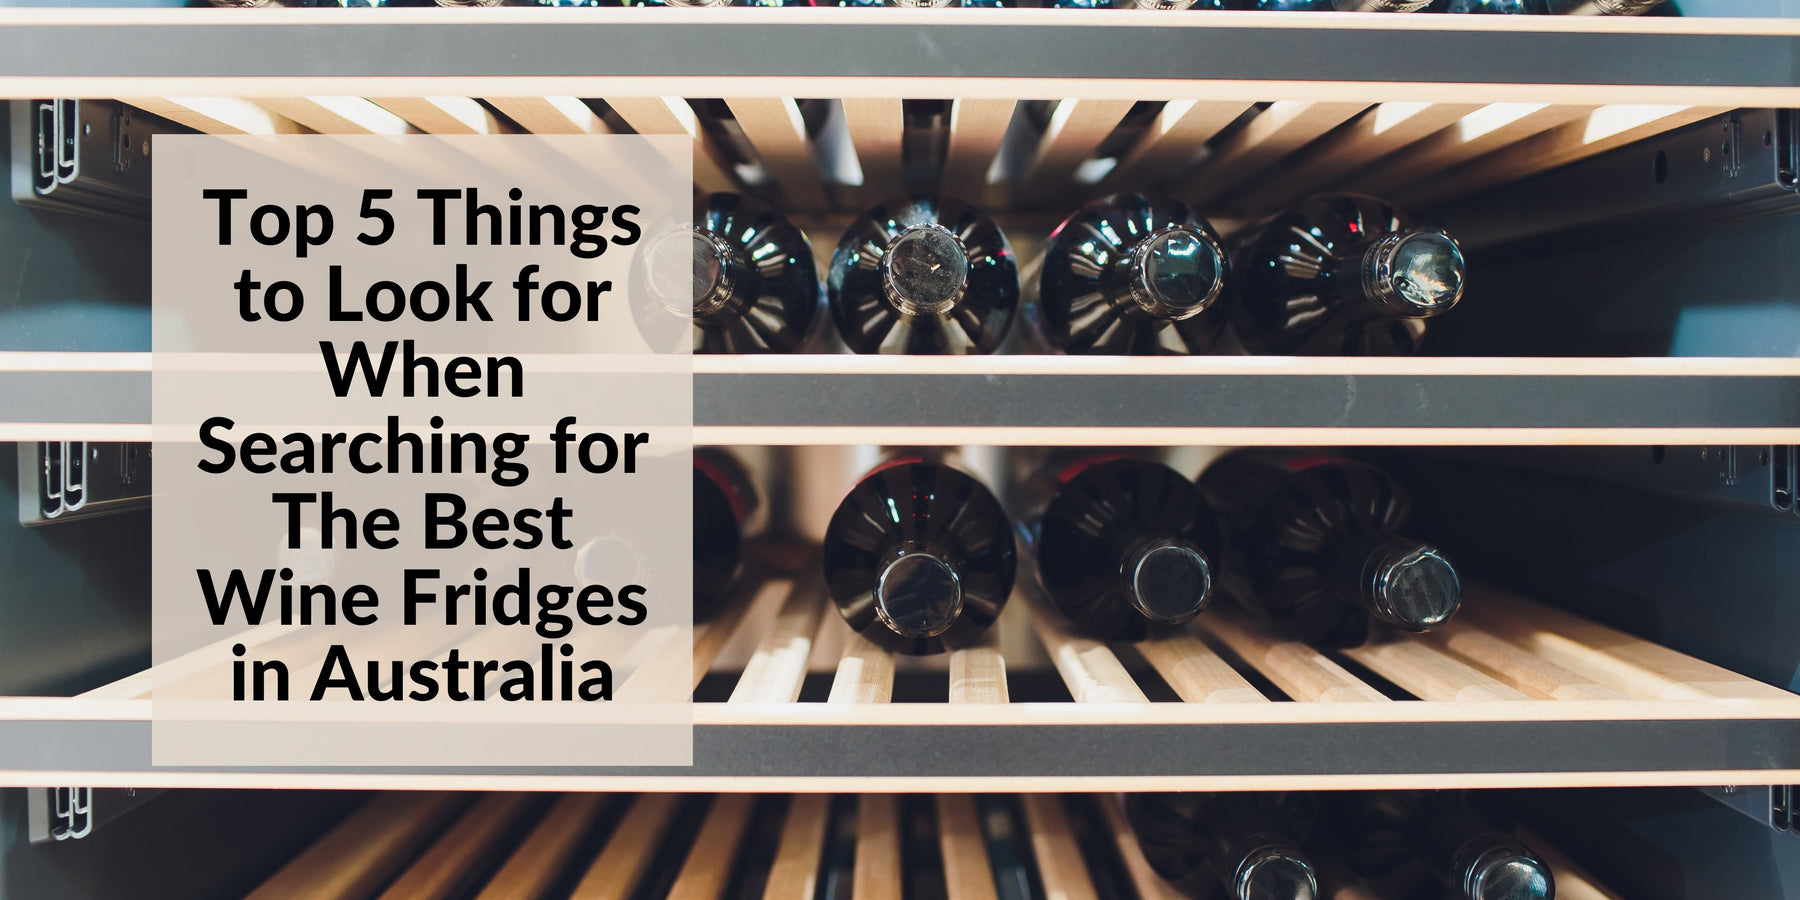 Top 5 Things to Look for When Searching for The Best Wine Fridges in Australia - Lushmist